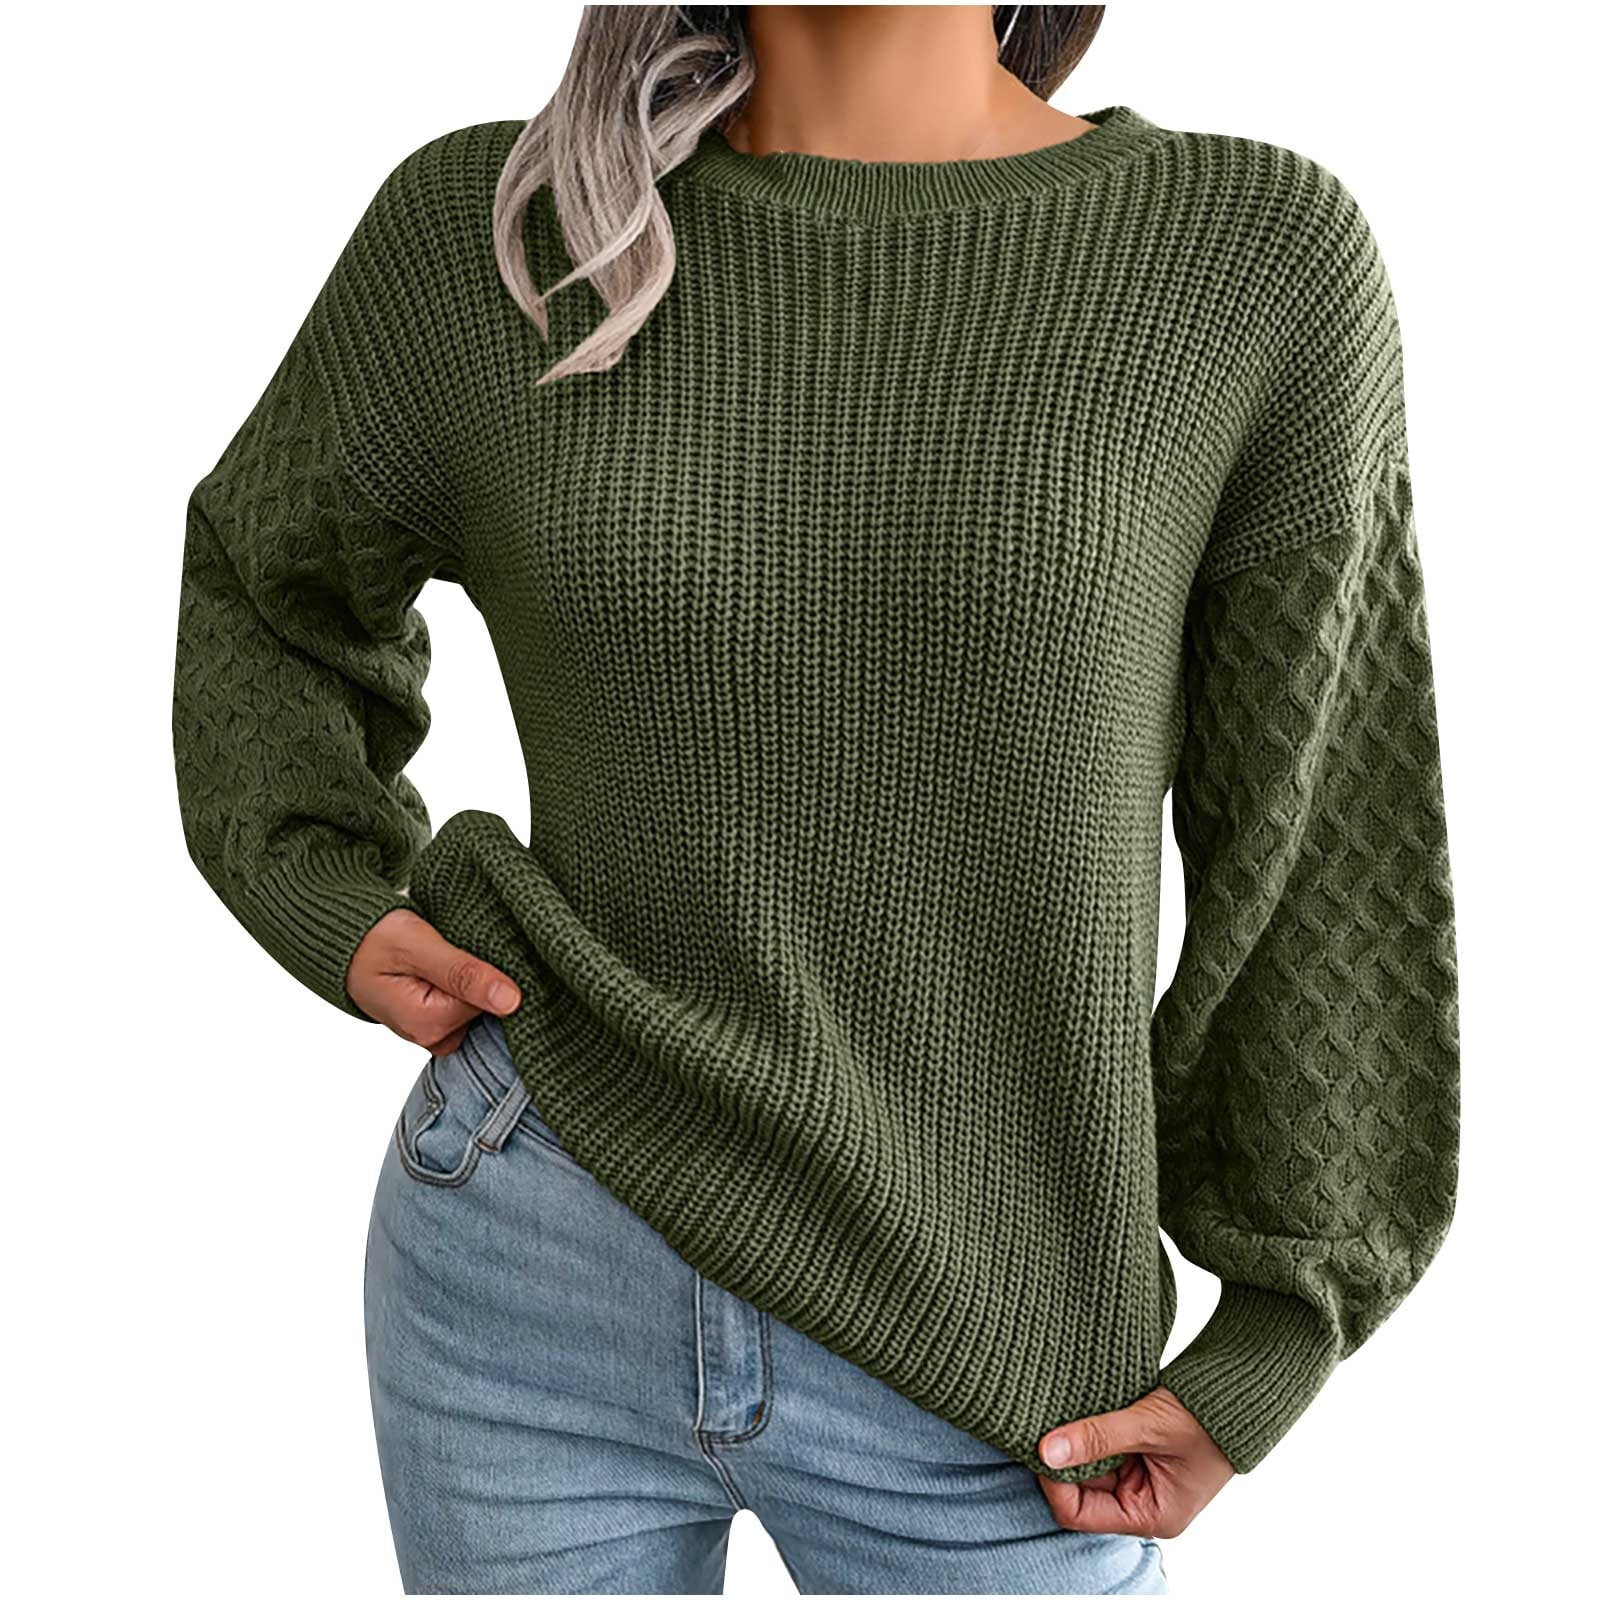 Women's Ribbed Knit Sweater Long Sleeve Crewneck Fall Winter Sweaters  Casual Loose Soft Pullover Knitwear Tops 